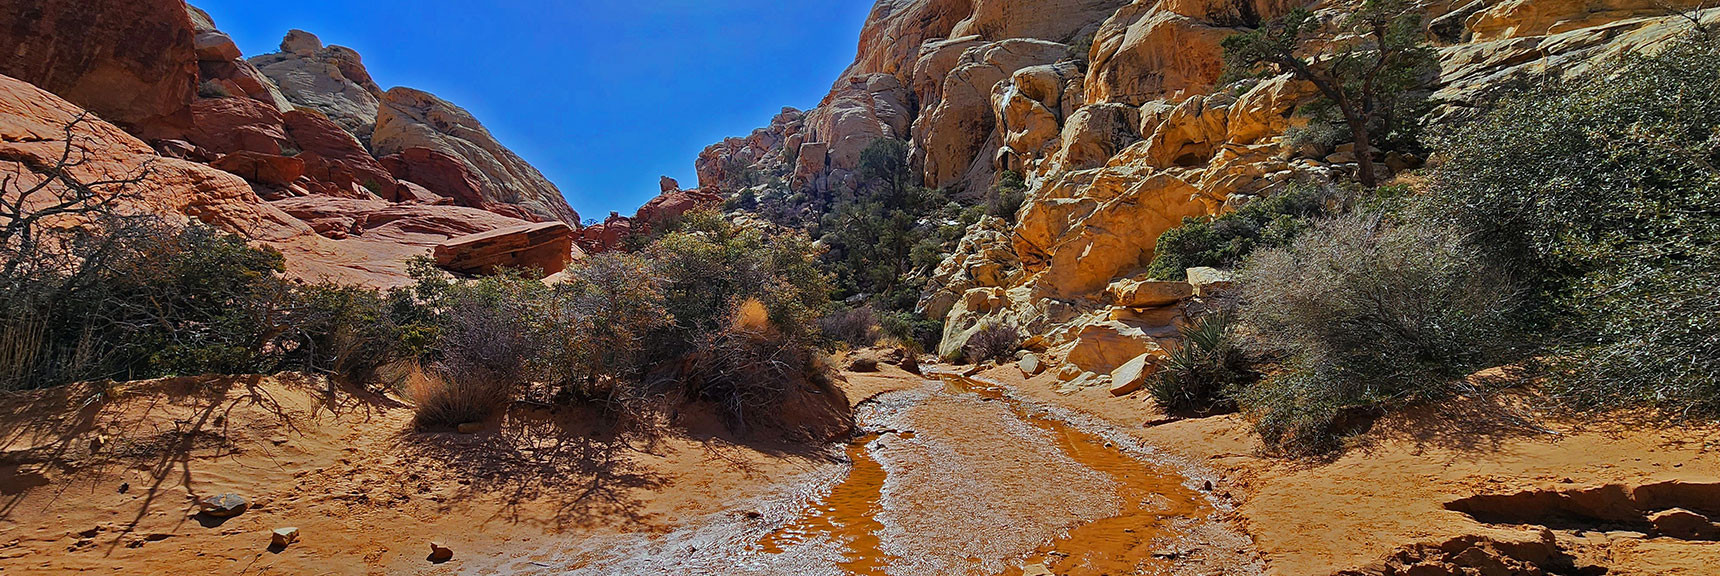 Now Ascending the Calico Tanks Trail. Late March. Lots of Flowing Water. | Ash Canyon to Calico Tanks | Calico Basin and Red Rock Canyon, Nevada | David Smith | Las Vegas Area Trails